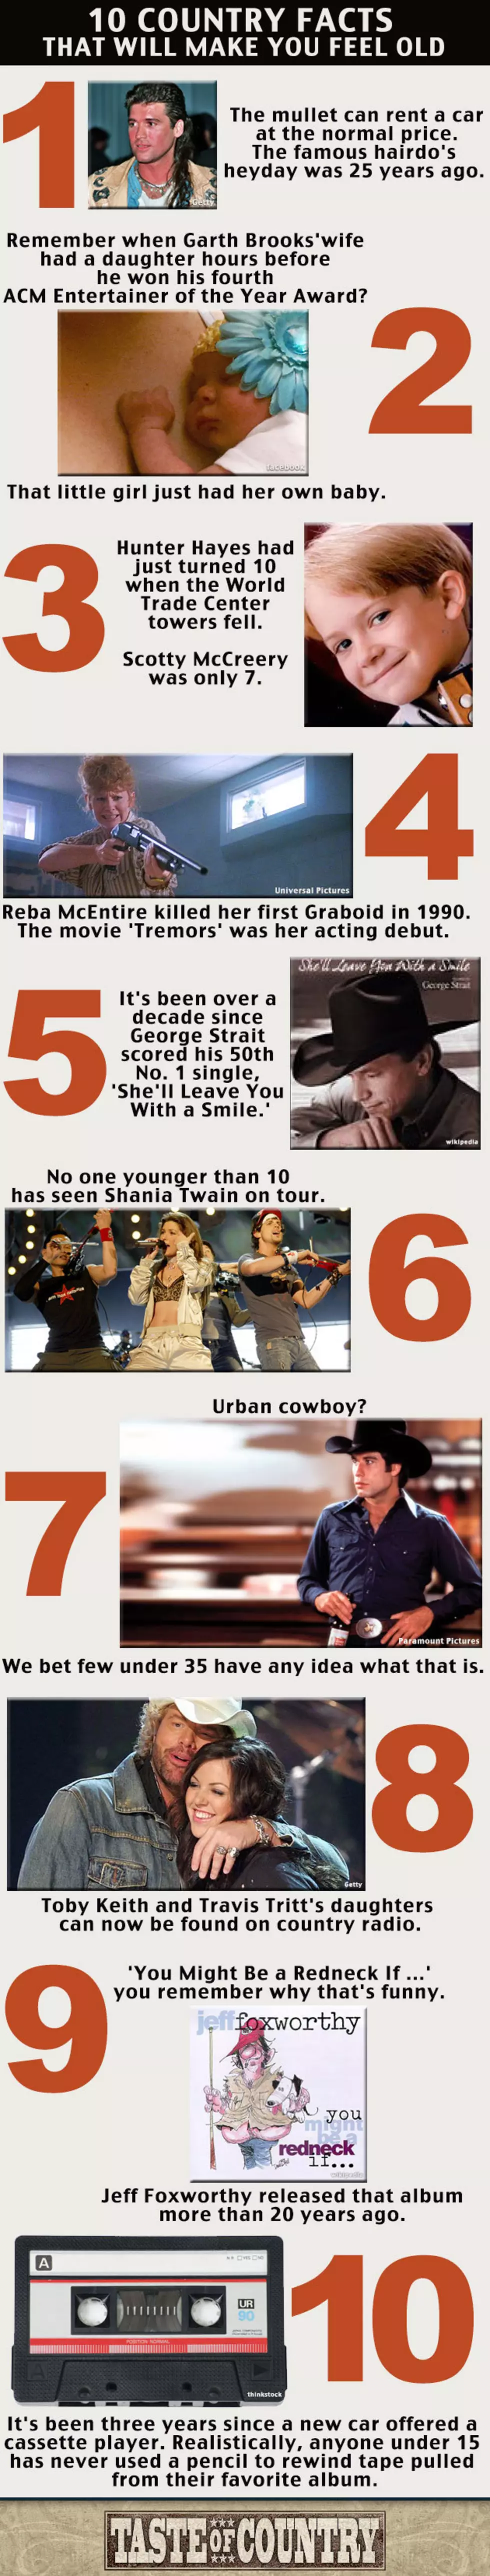 10 Country Facts That Will Make You Feel (Really) Old